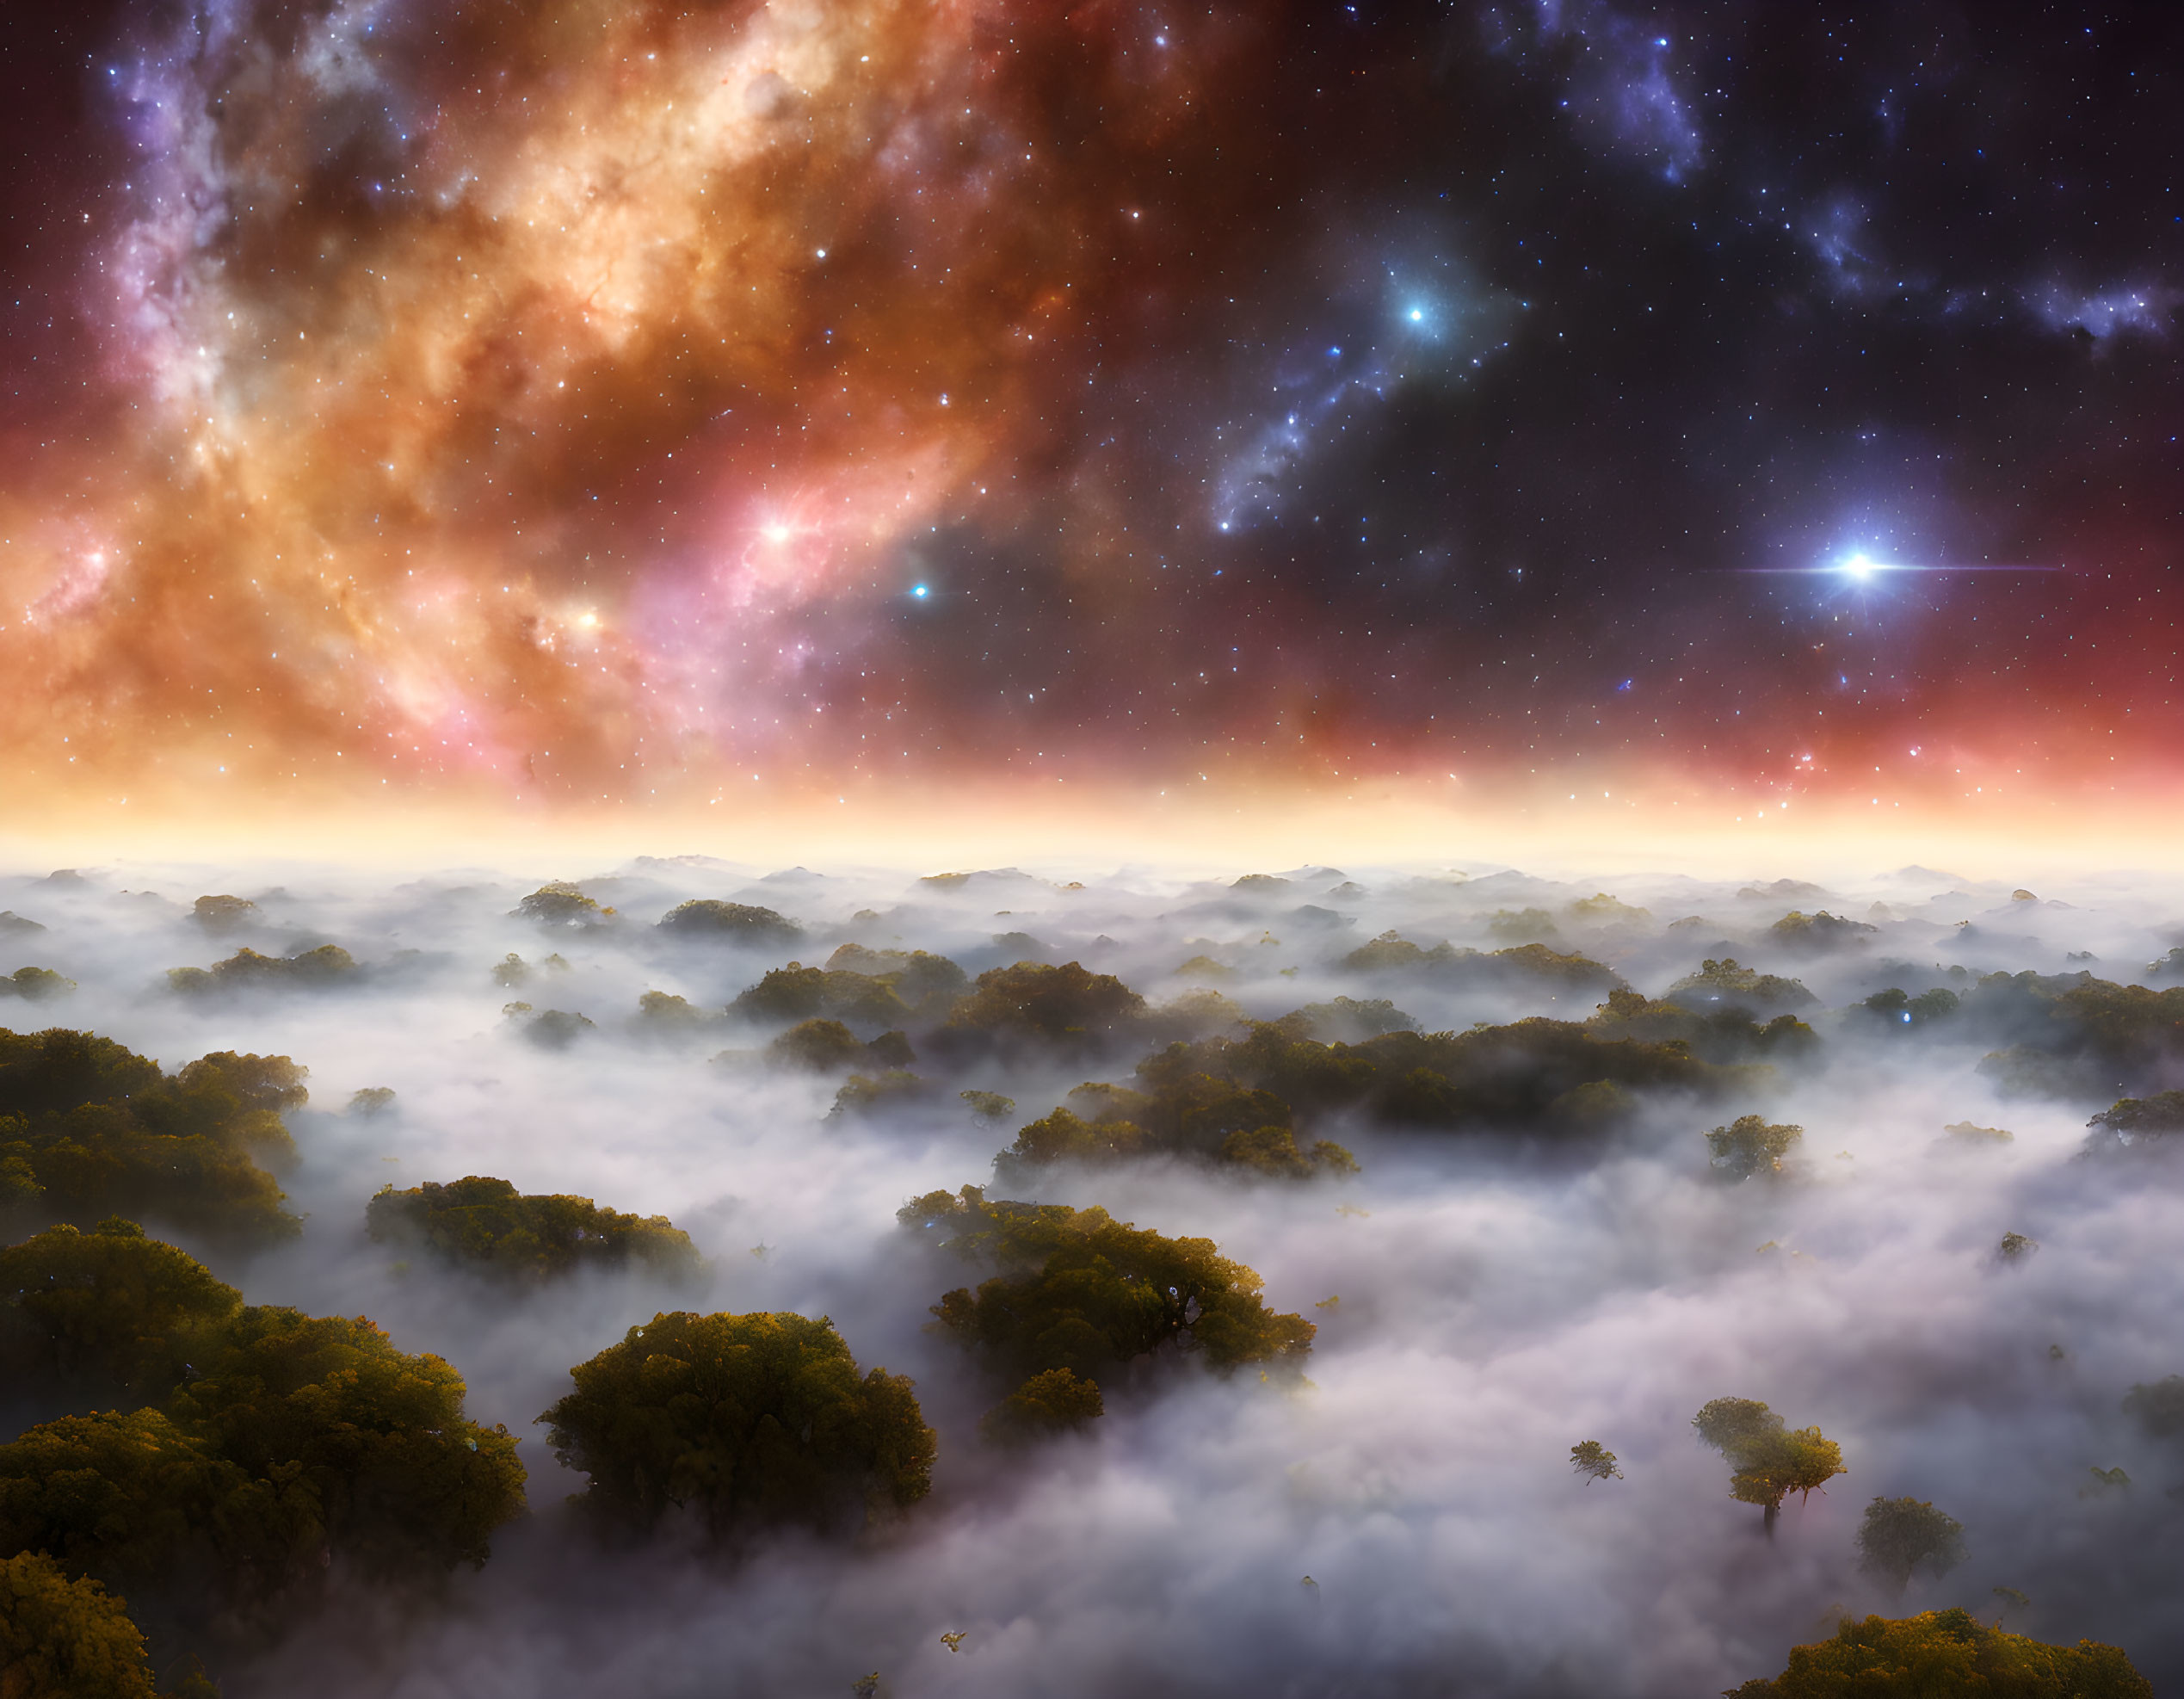 Misty forest landscape under starry sky with cosmic clouds.